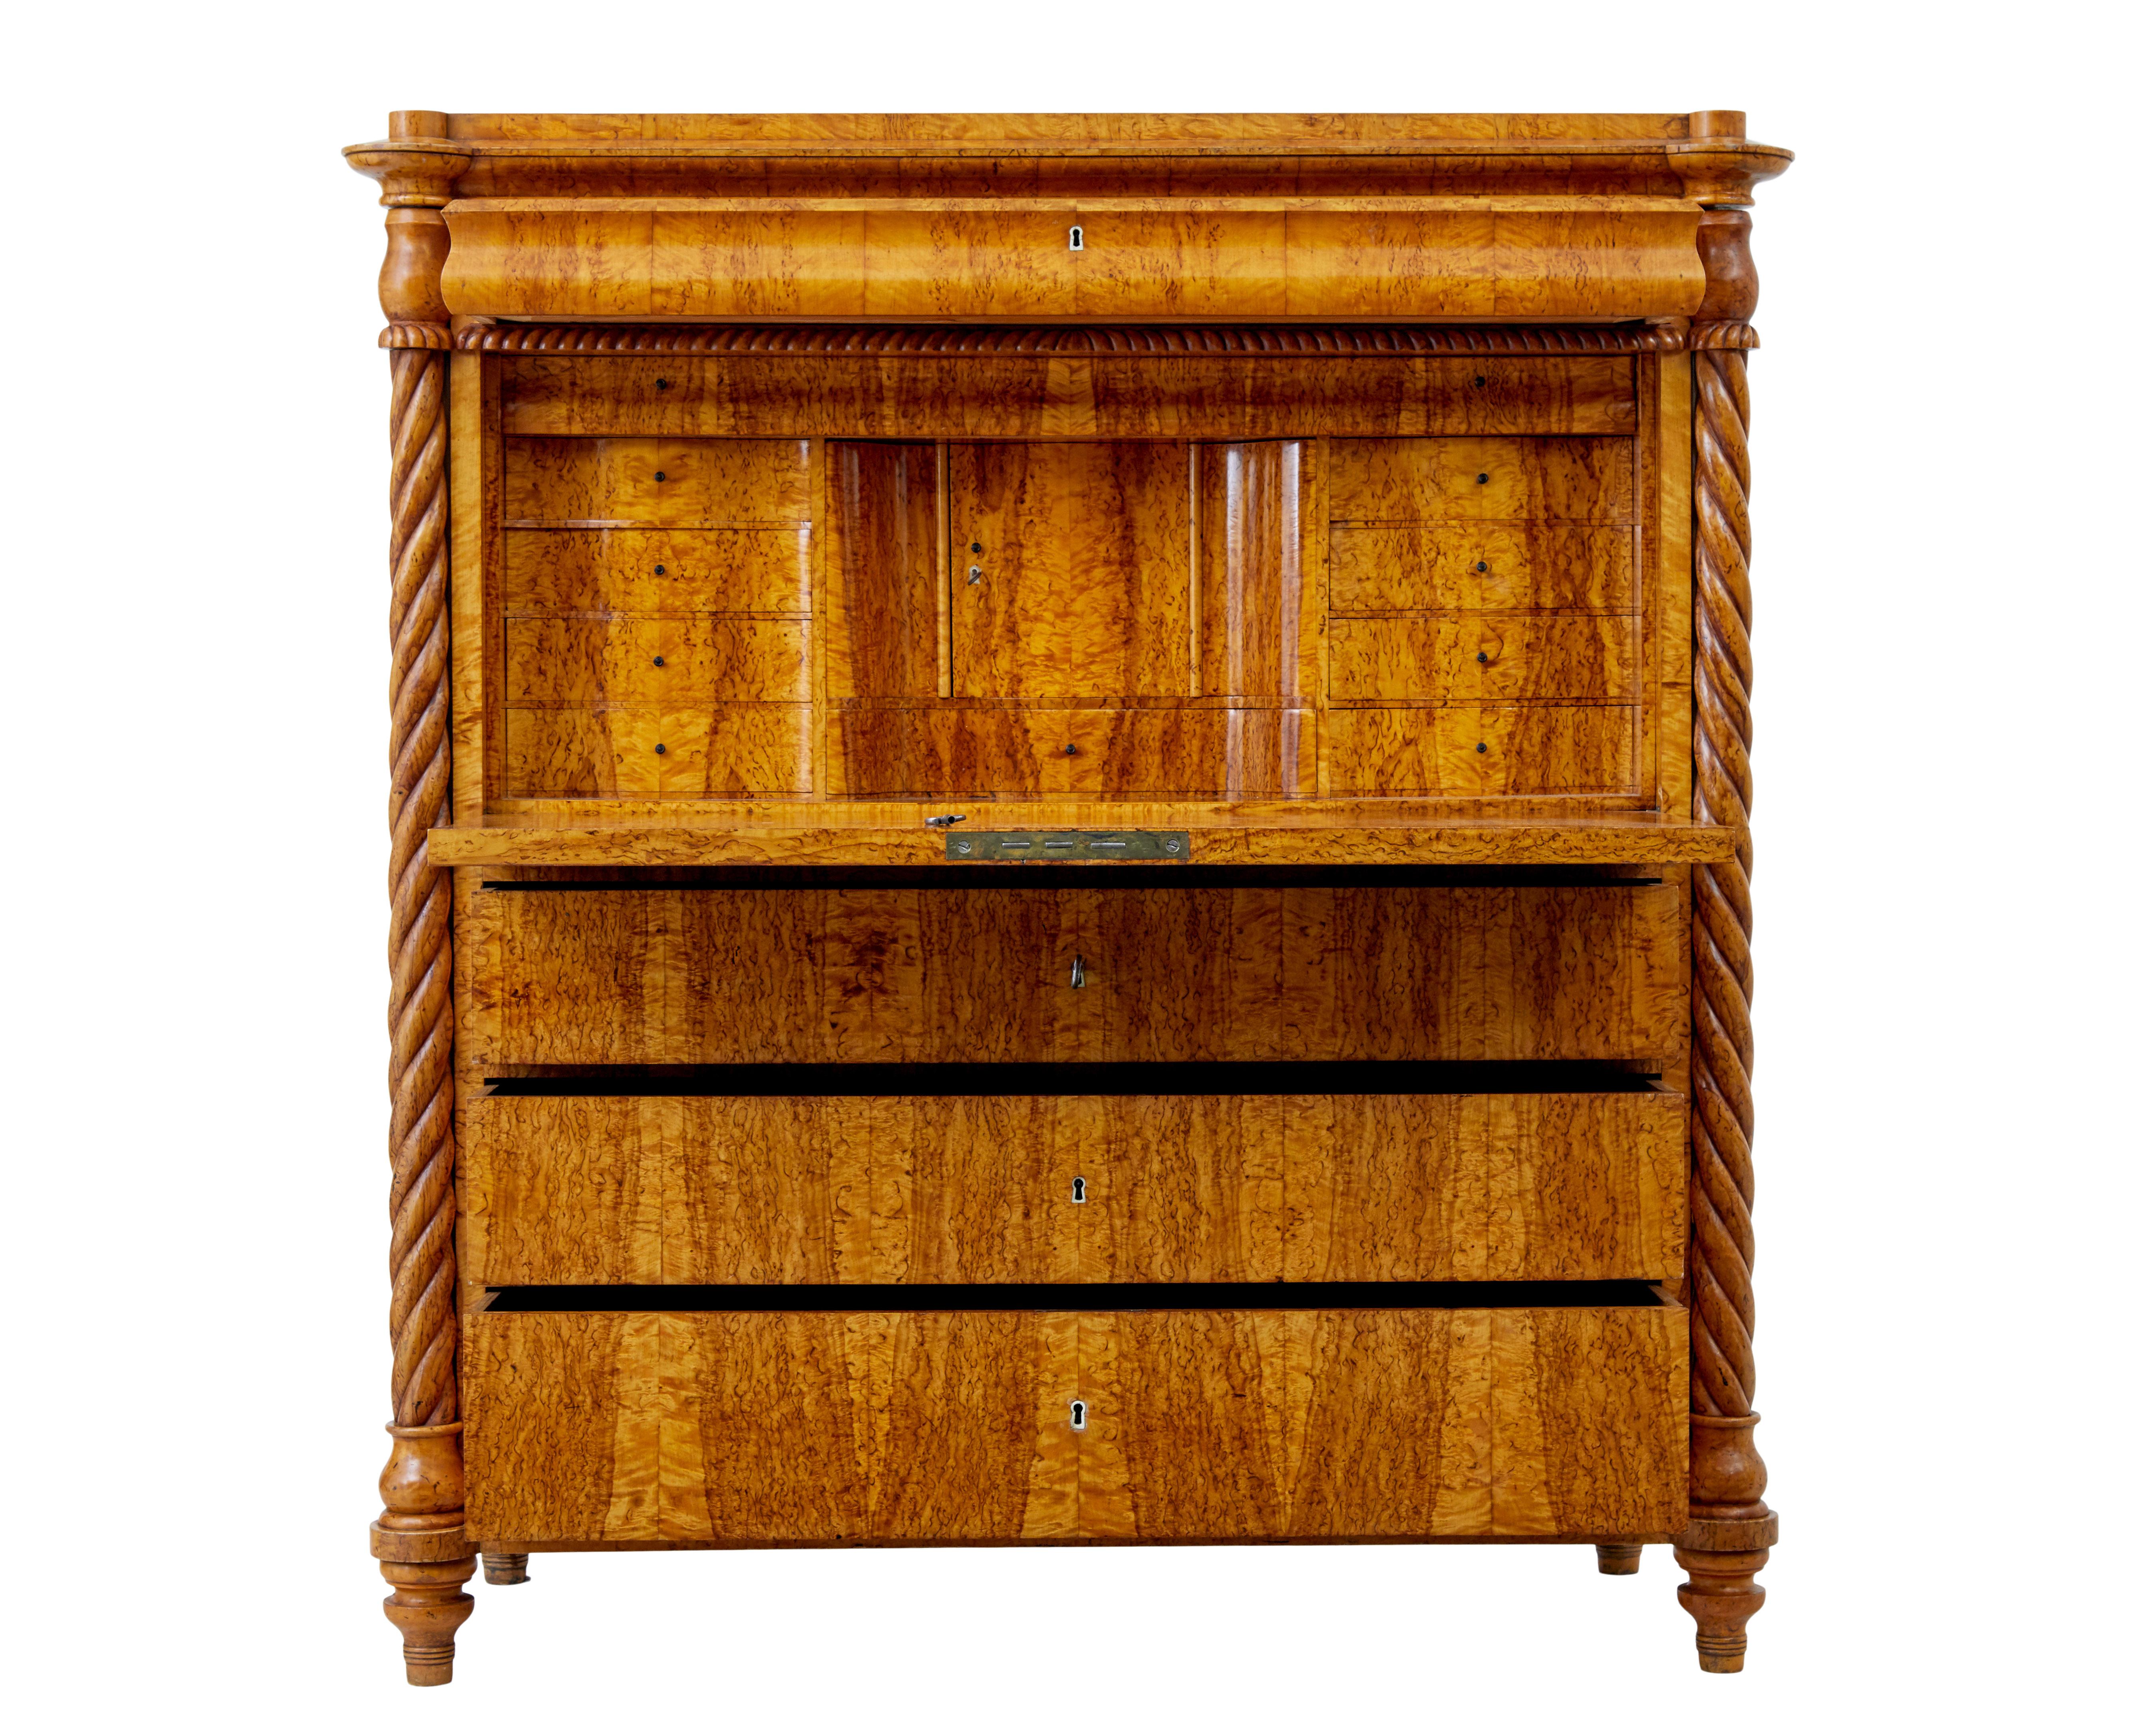 Carved Mid 19th century Swedish burr birch secretaire chest For Sale